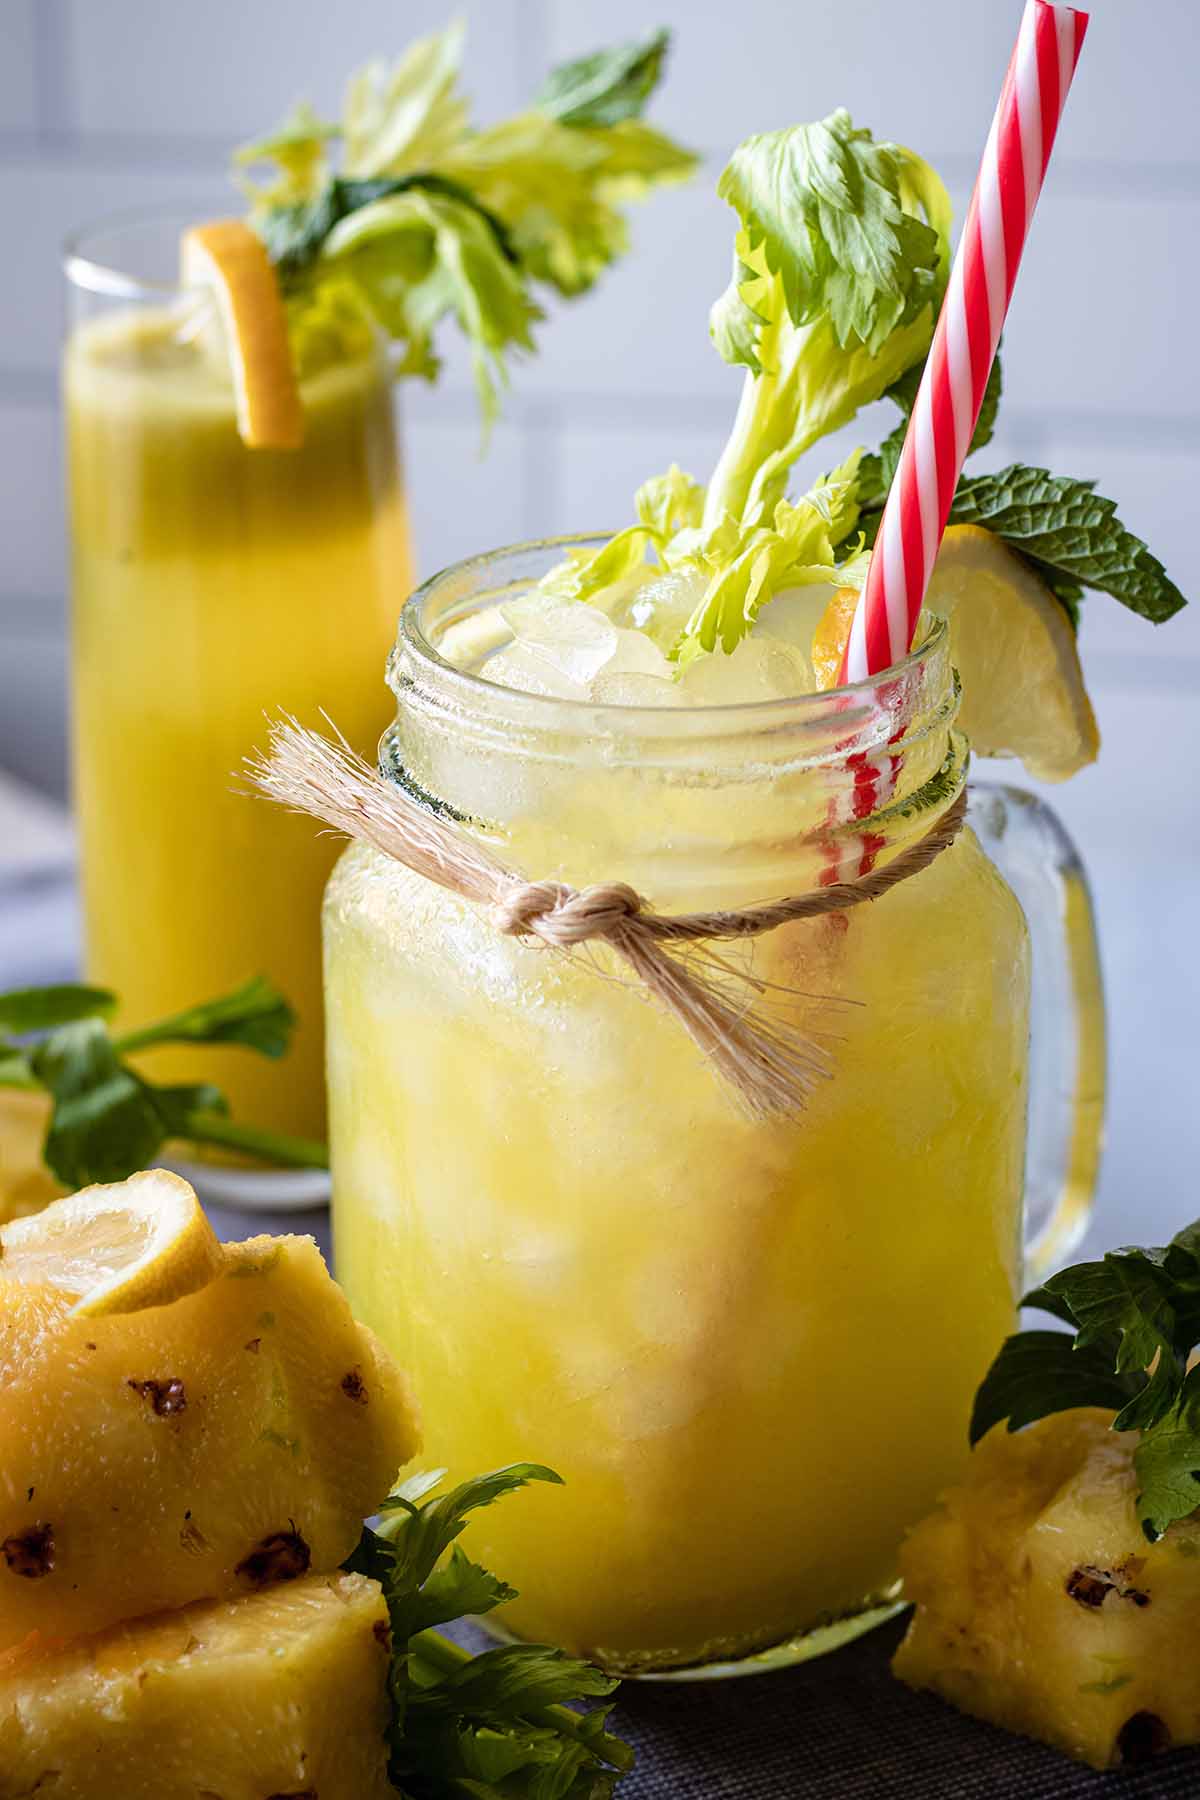 Close up of pineapple celery juice with a red and white straw garnished with celery greens, fresh mint, and a lemon slice in a mug jar .